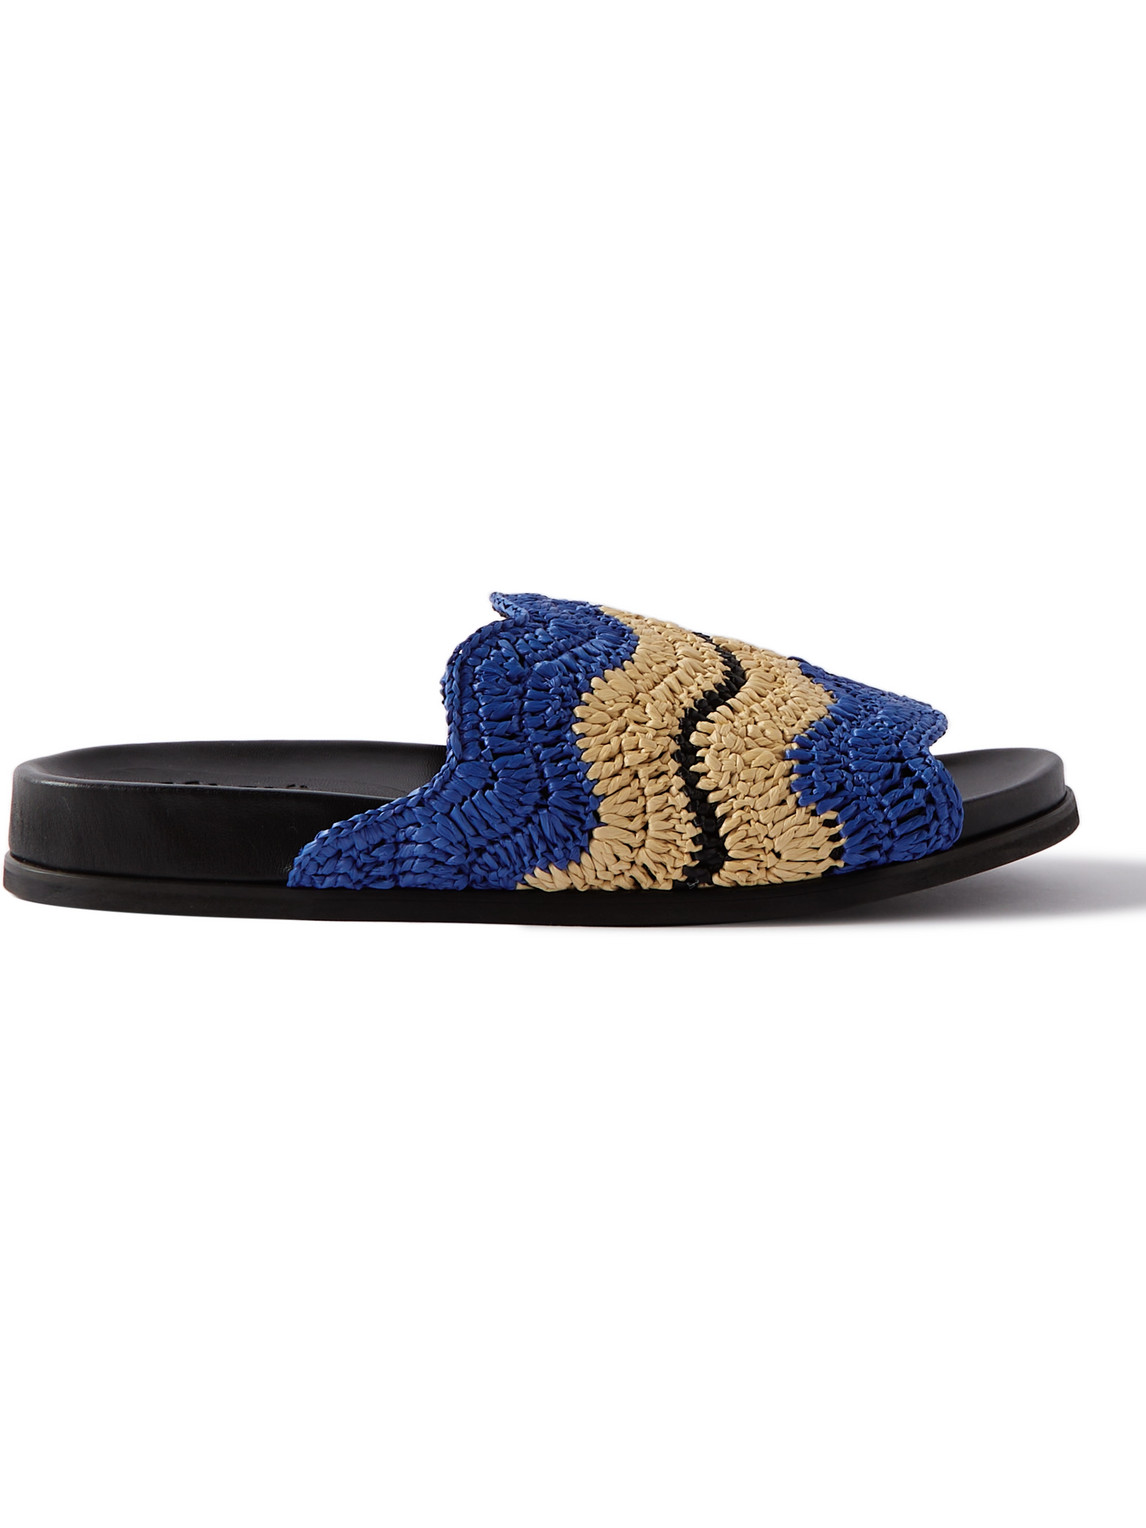 No Vacancy Inn Striped Woven Raffia and Leather Slides